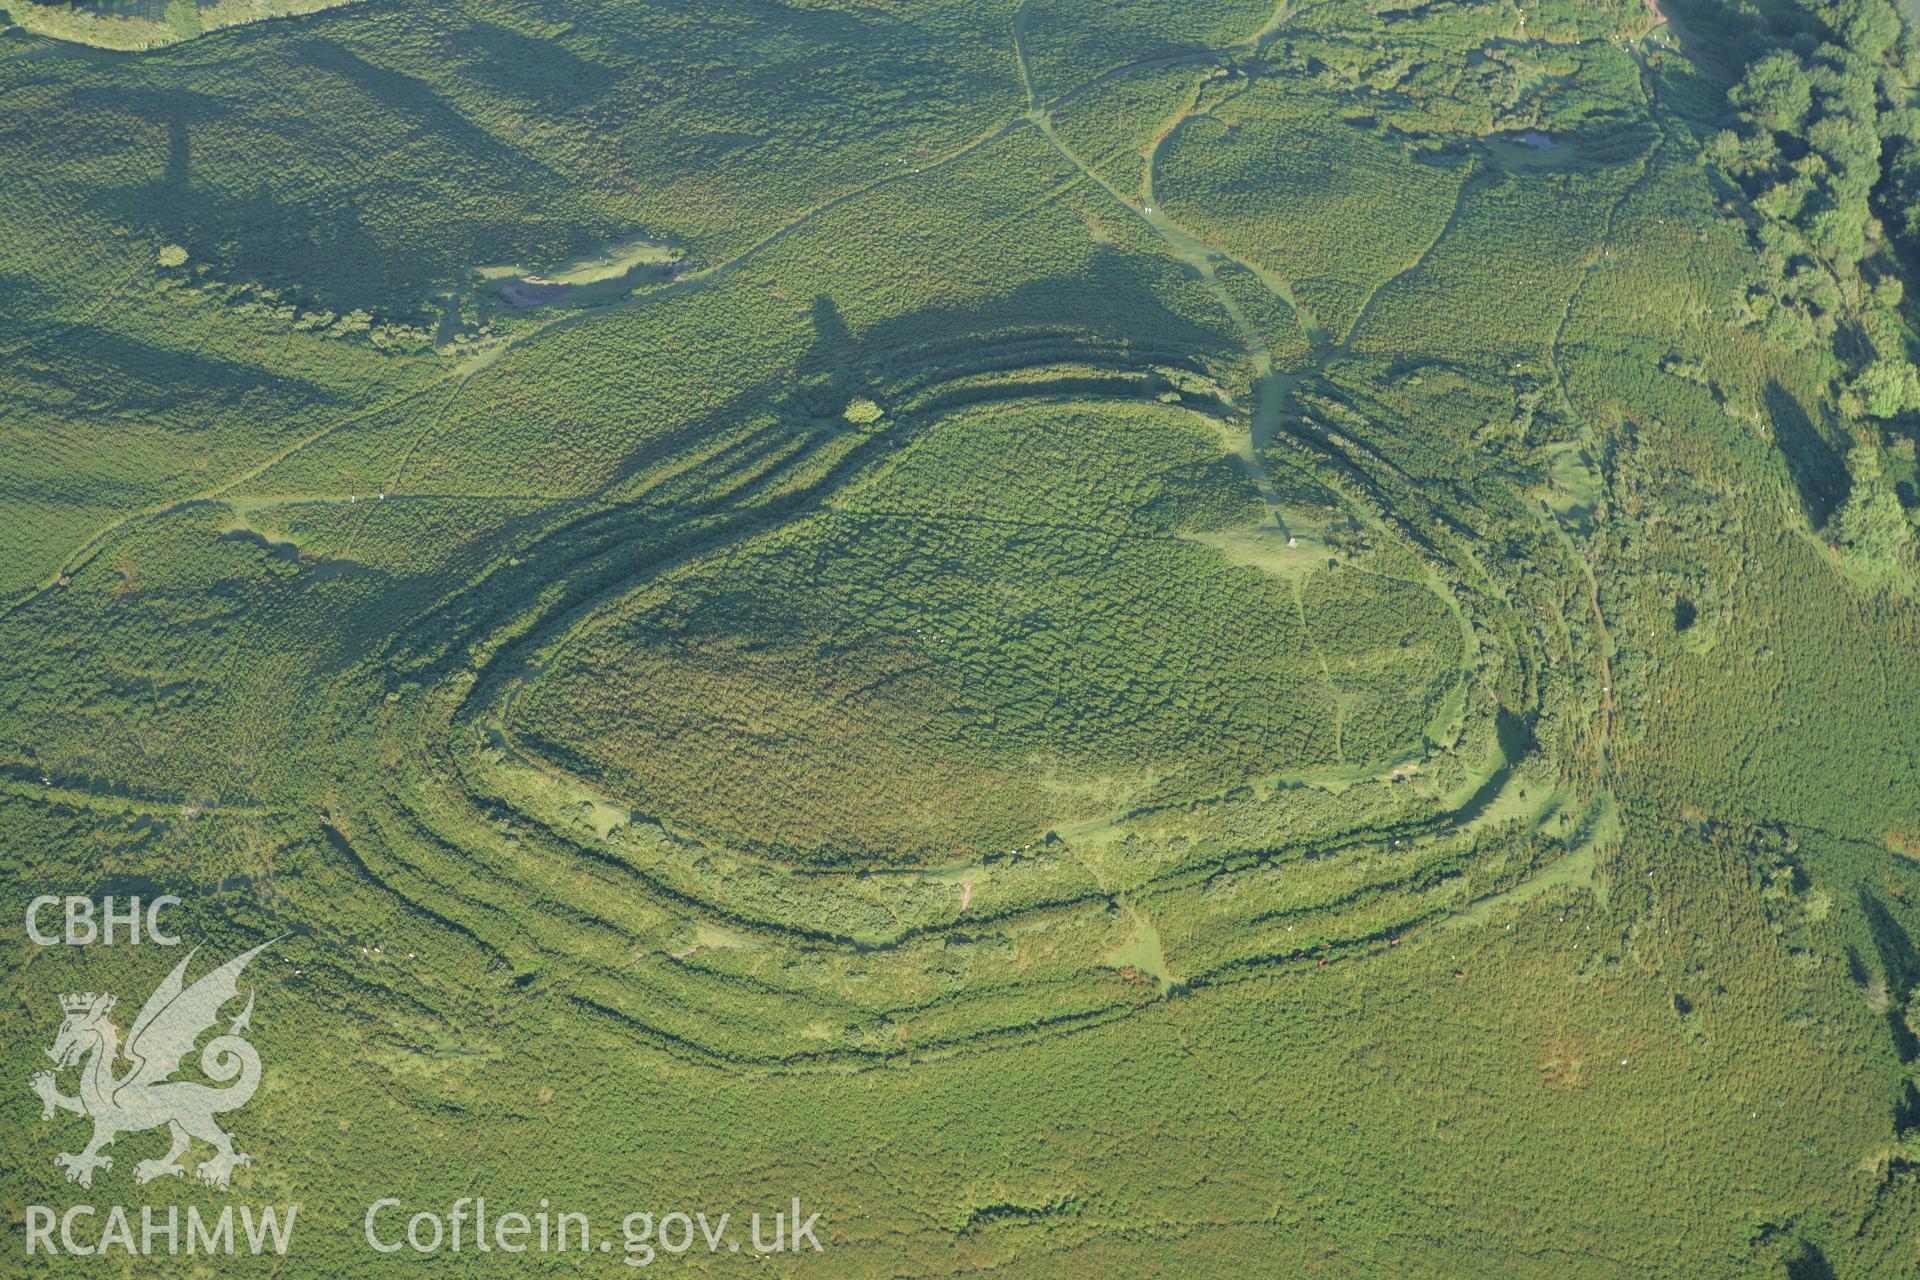 RCAHMW colour oblique aerial photograph of Pen-y-Crug Hillfort. Taken on 08 August 2007 by Toby Driver